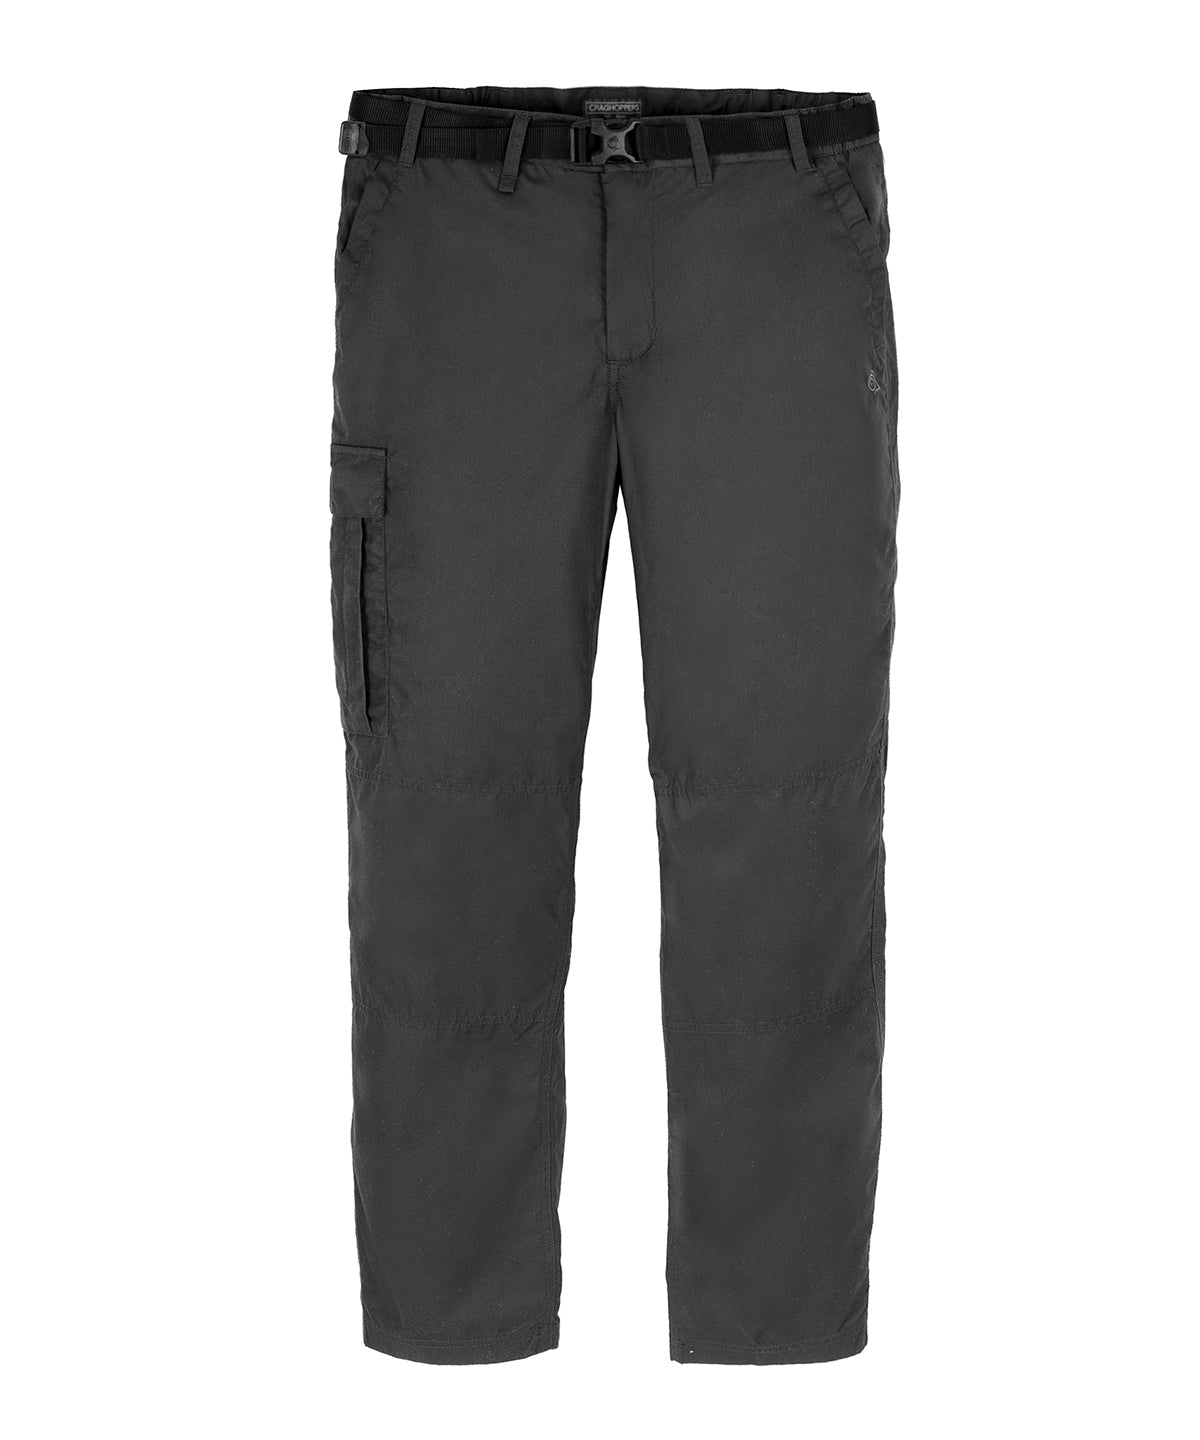 Personalised Trousers - Black Craghoppers Expert Kiwi tailored trousers